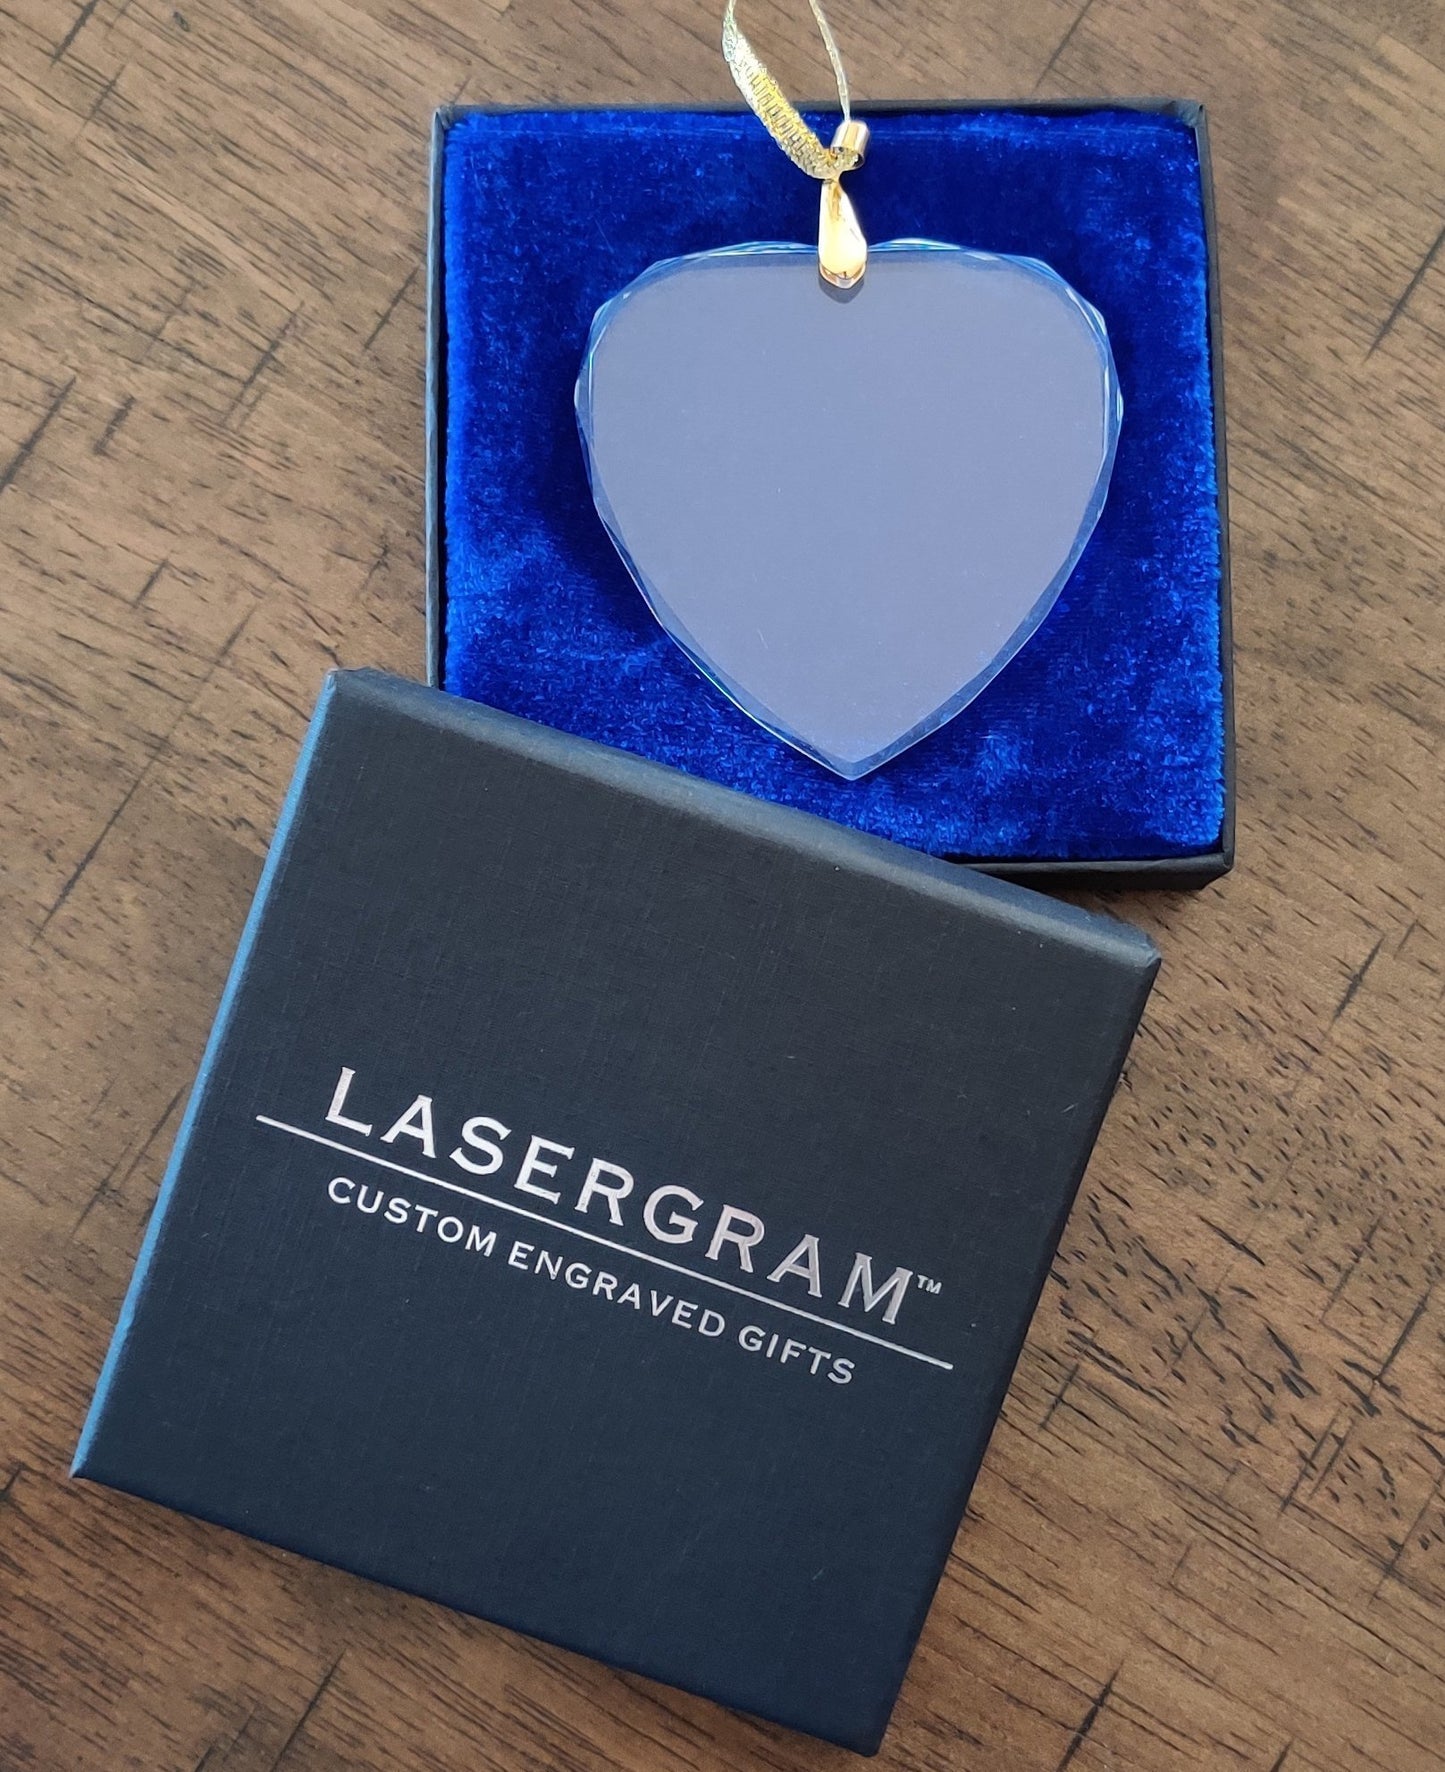 LaserGram Christmas Ornament, World's Greatest Granddaughter, Personalized Engraving Included (Heart Shape)